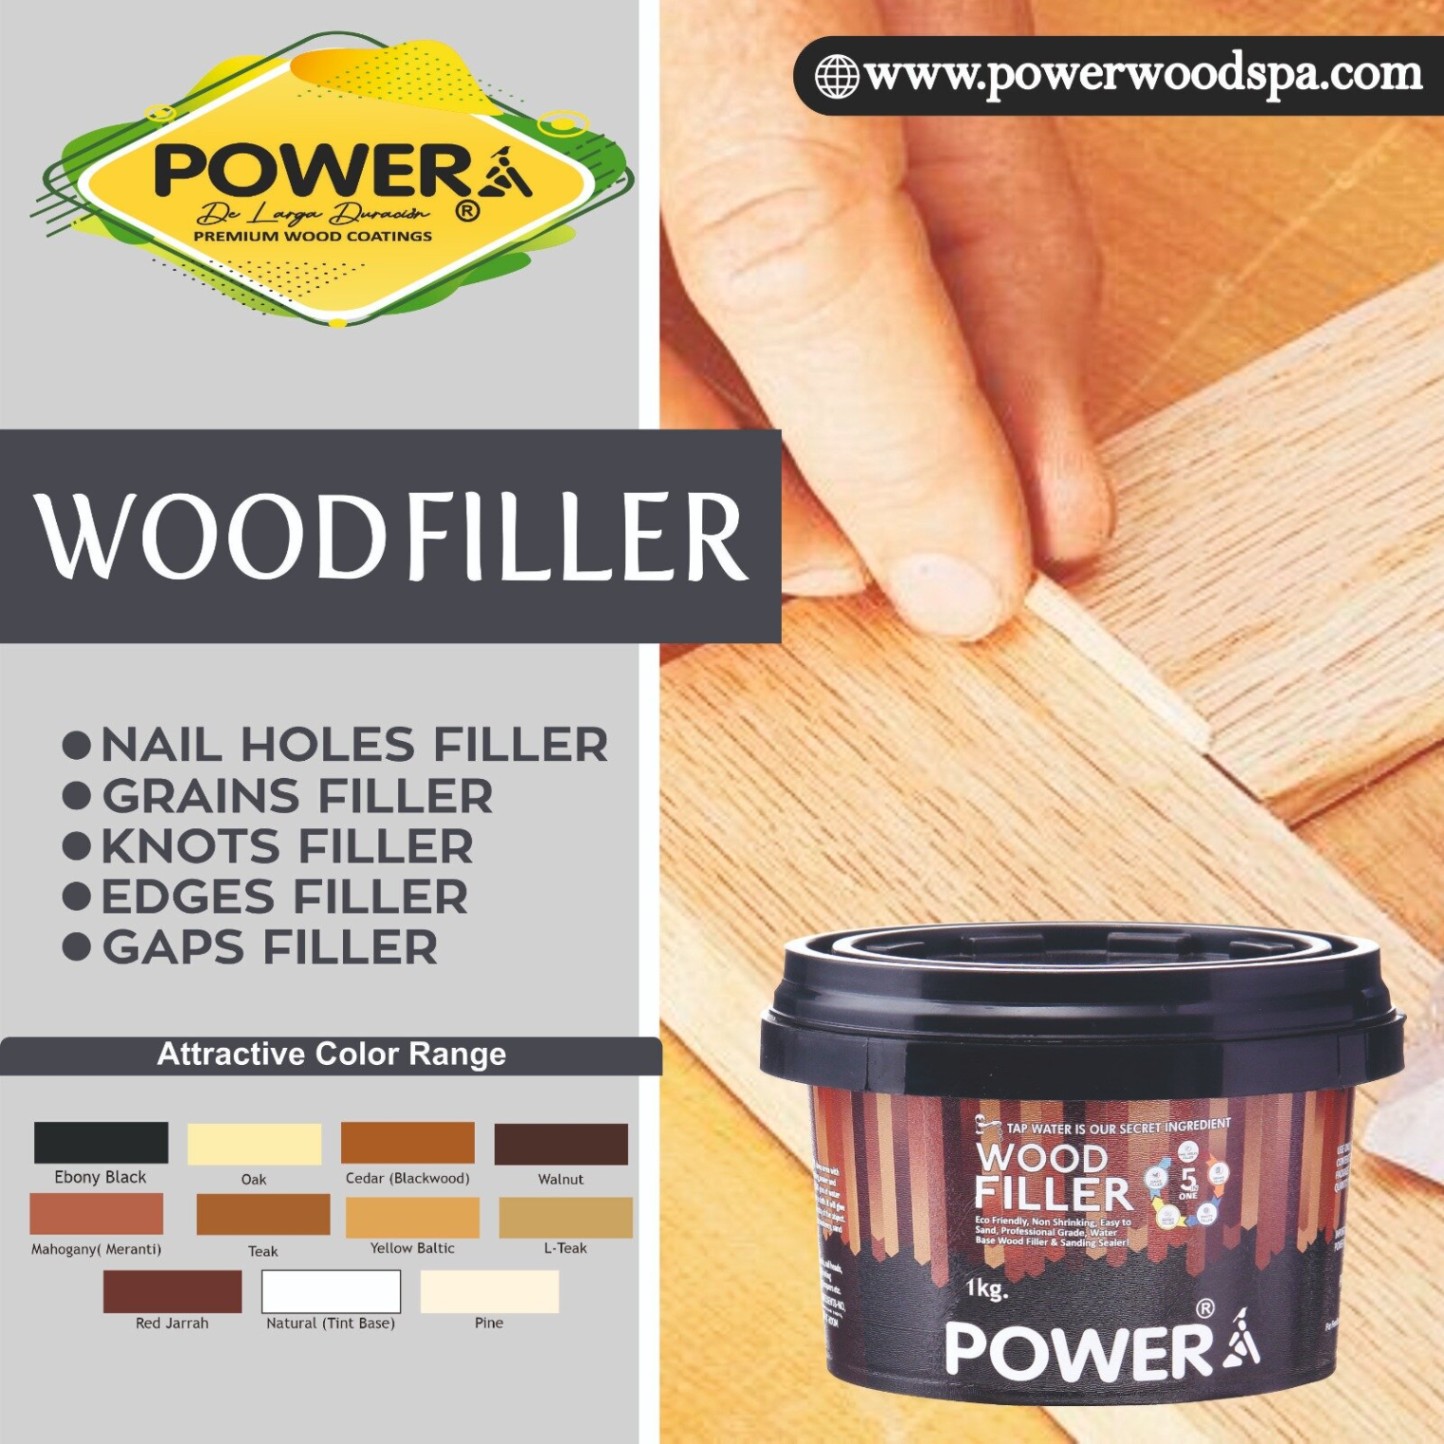 Pores No More Achieving Seamless Wood with the Right Filler